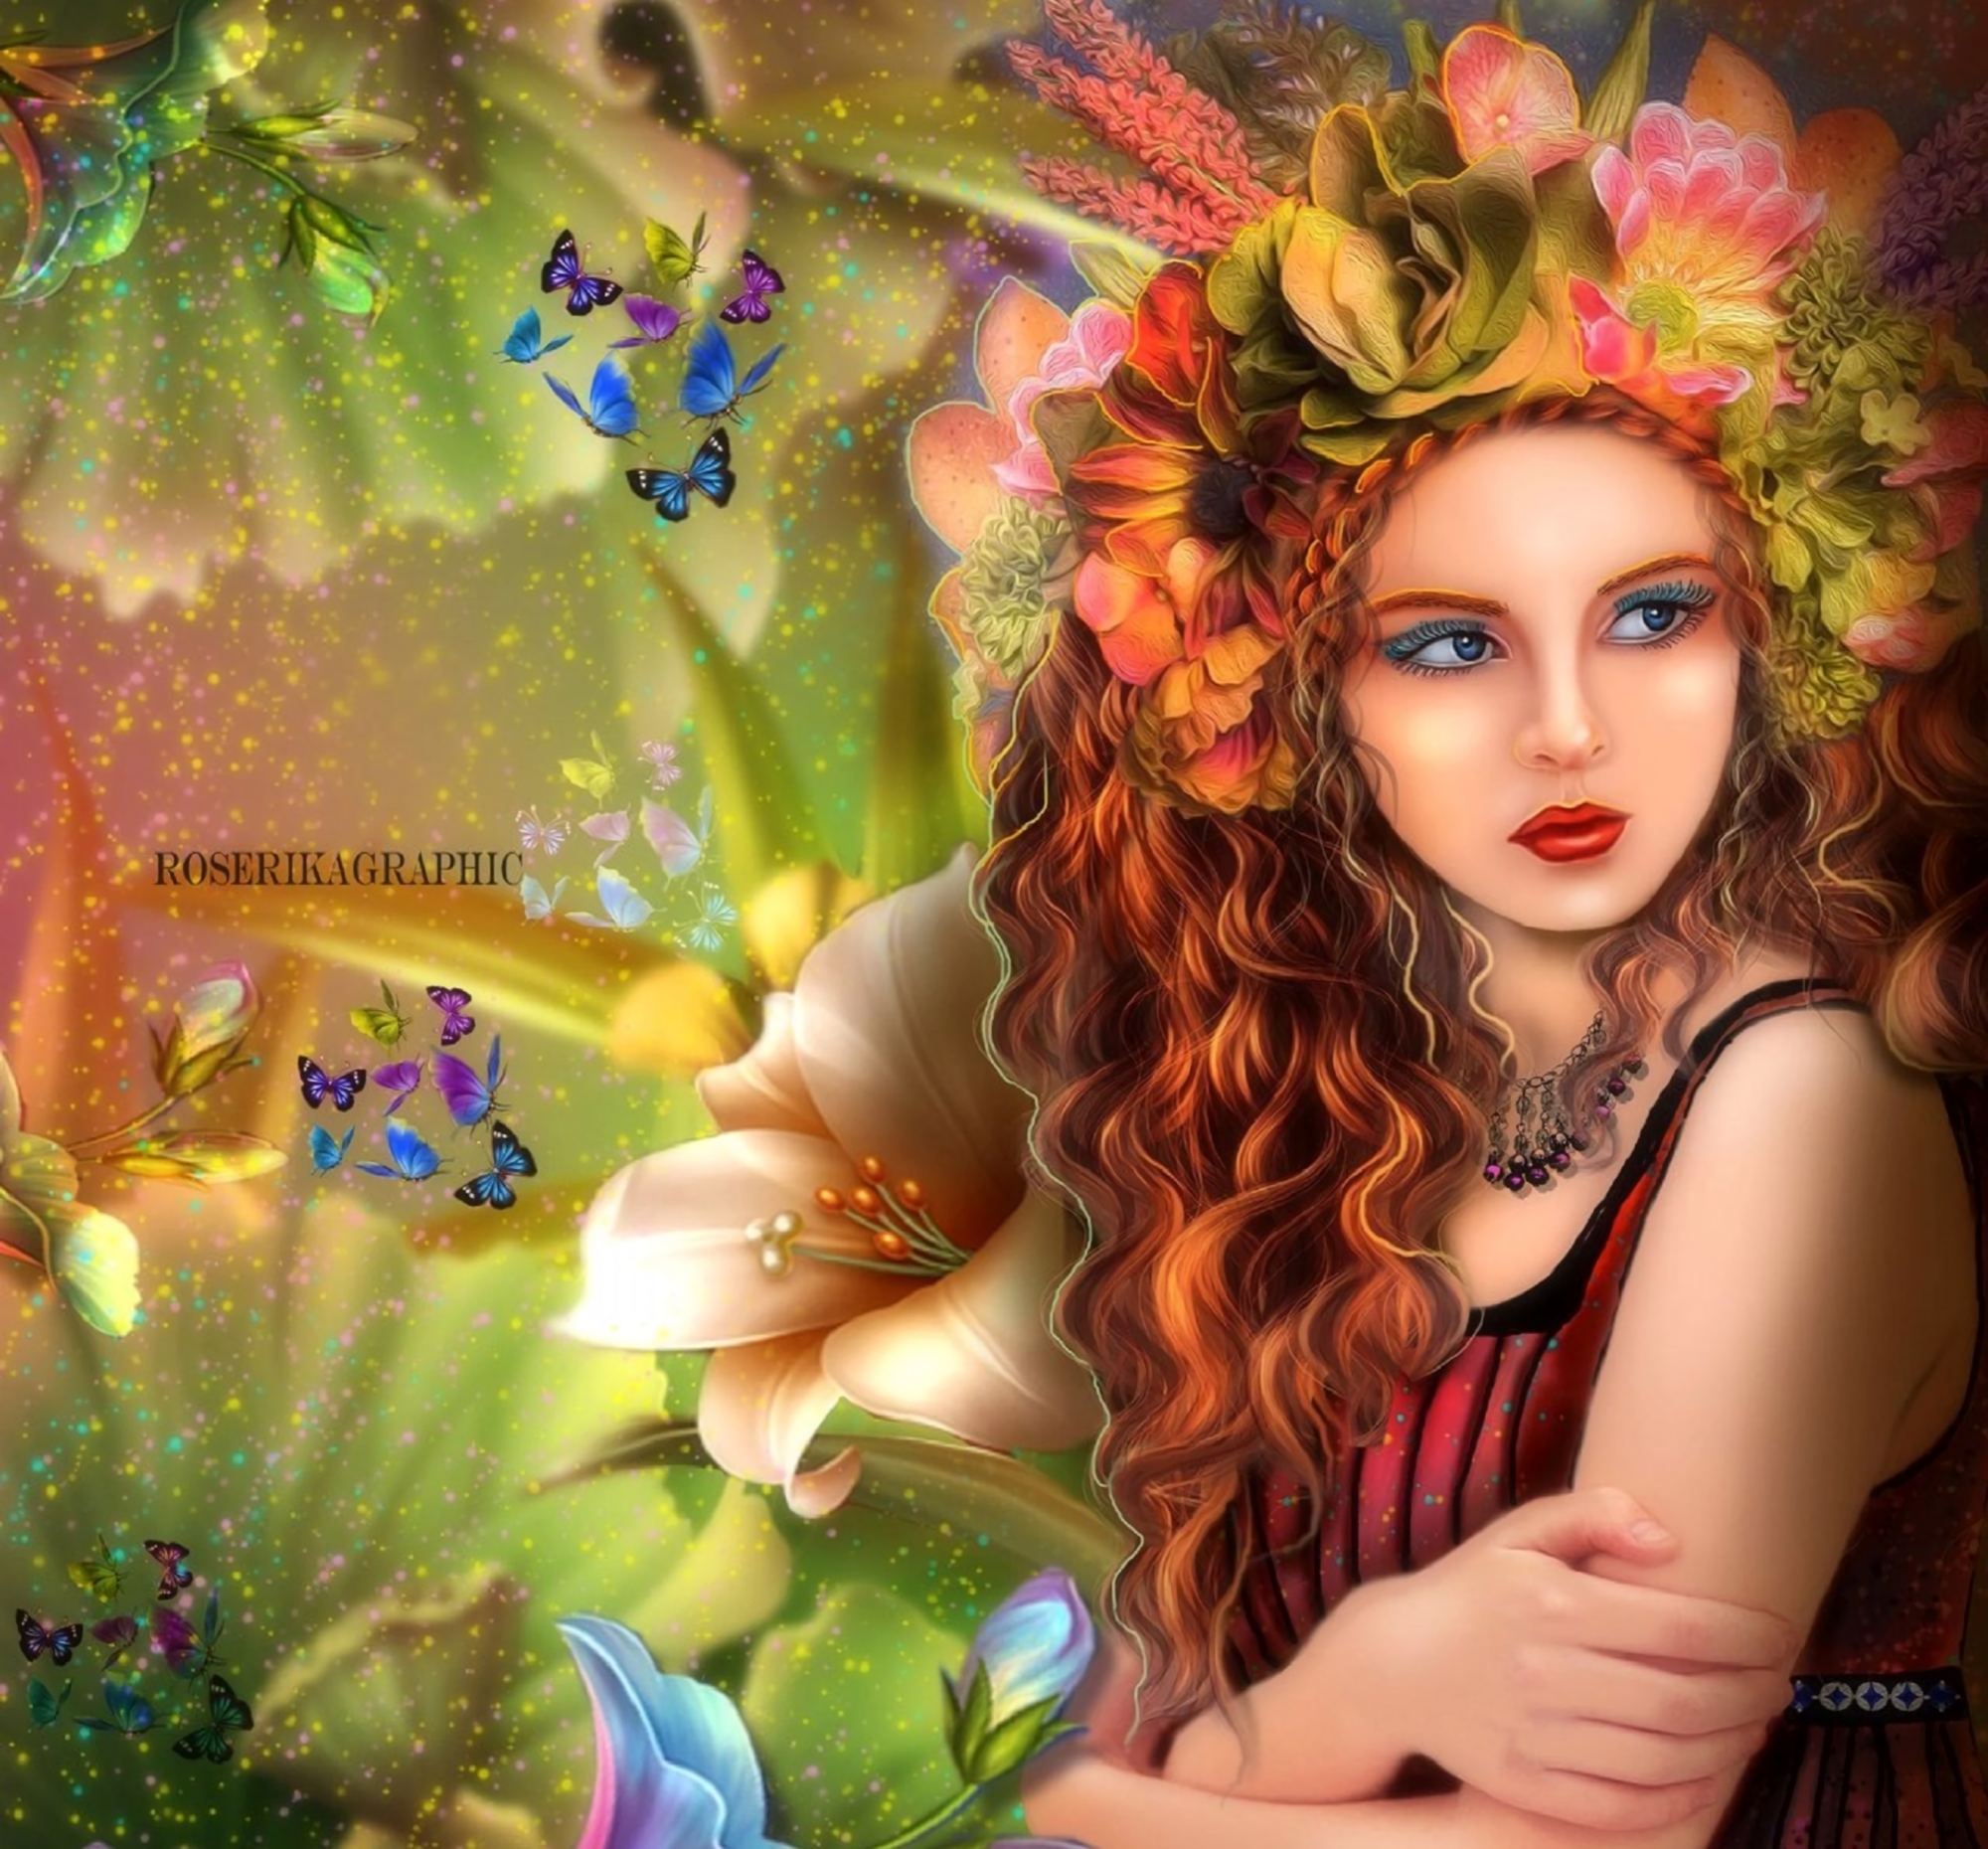 Butterfly Girl Image Download - HD Wallpaper 